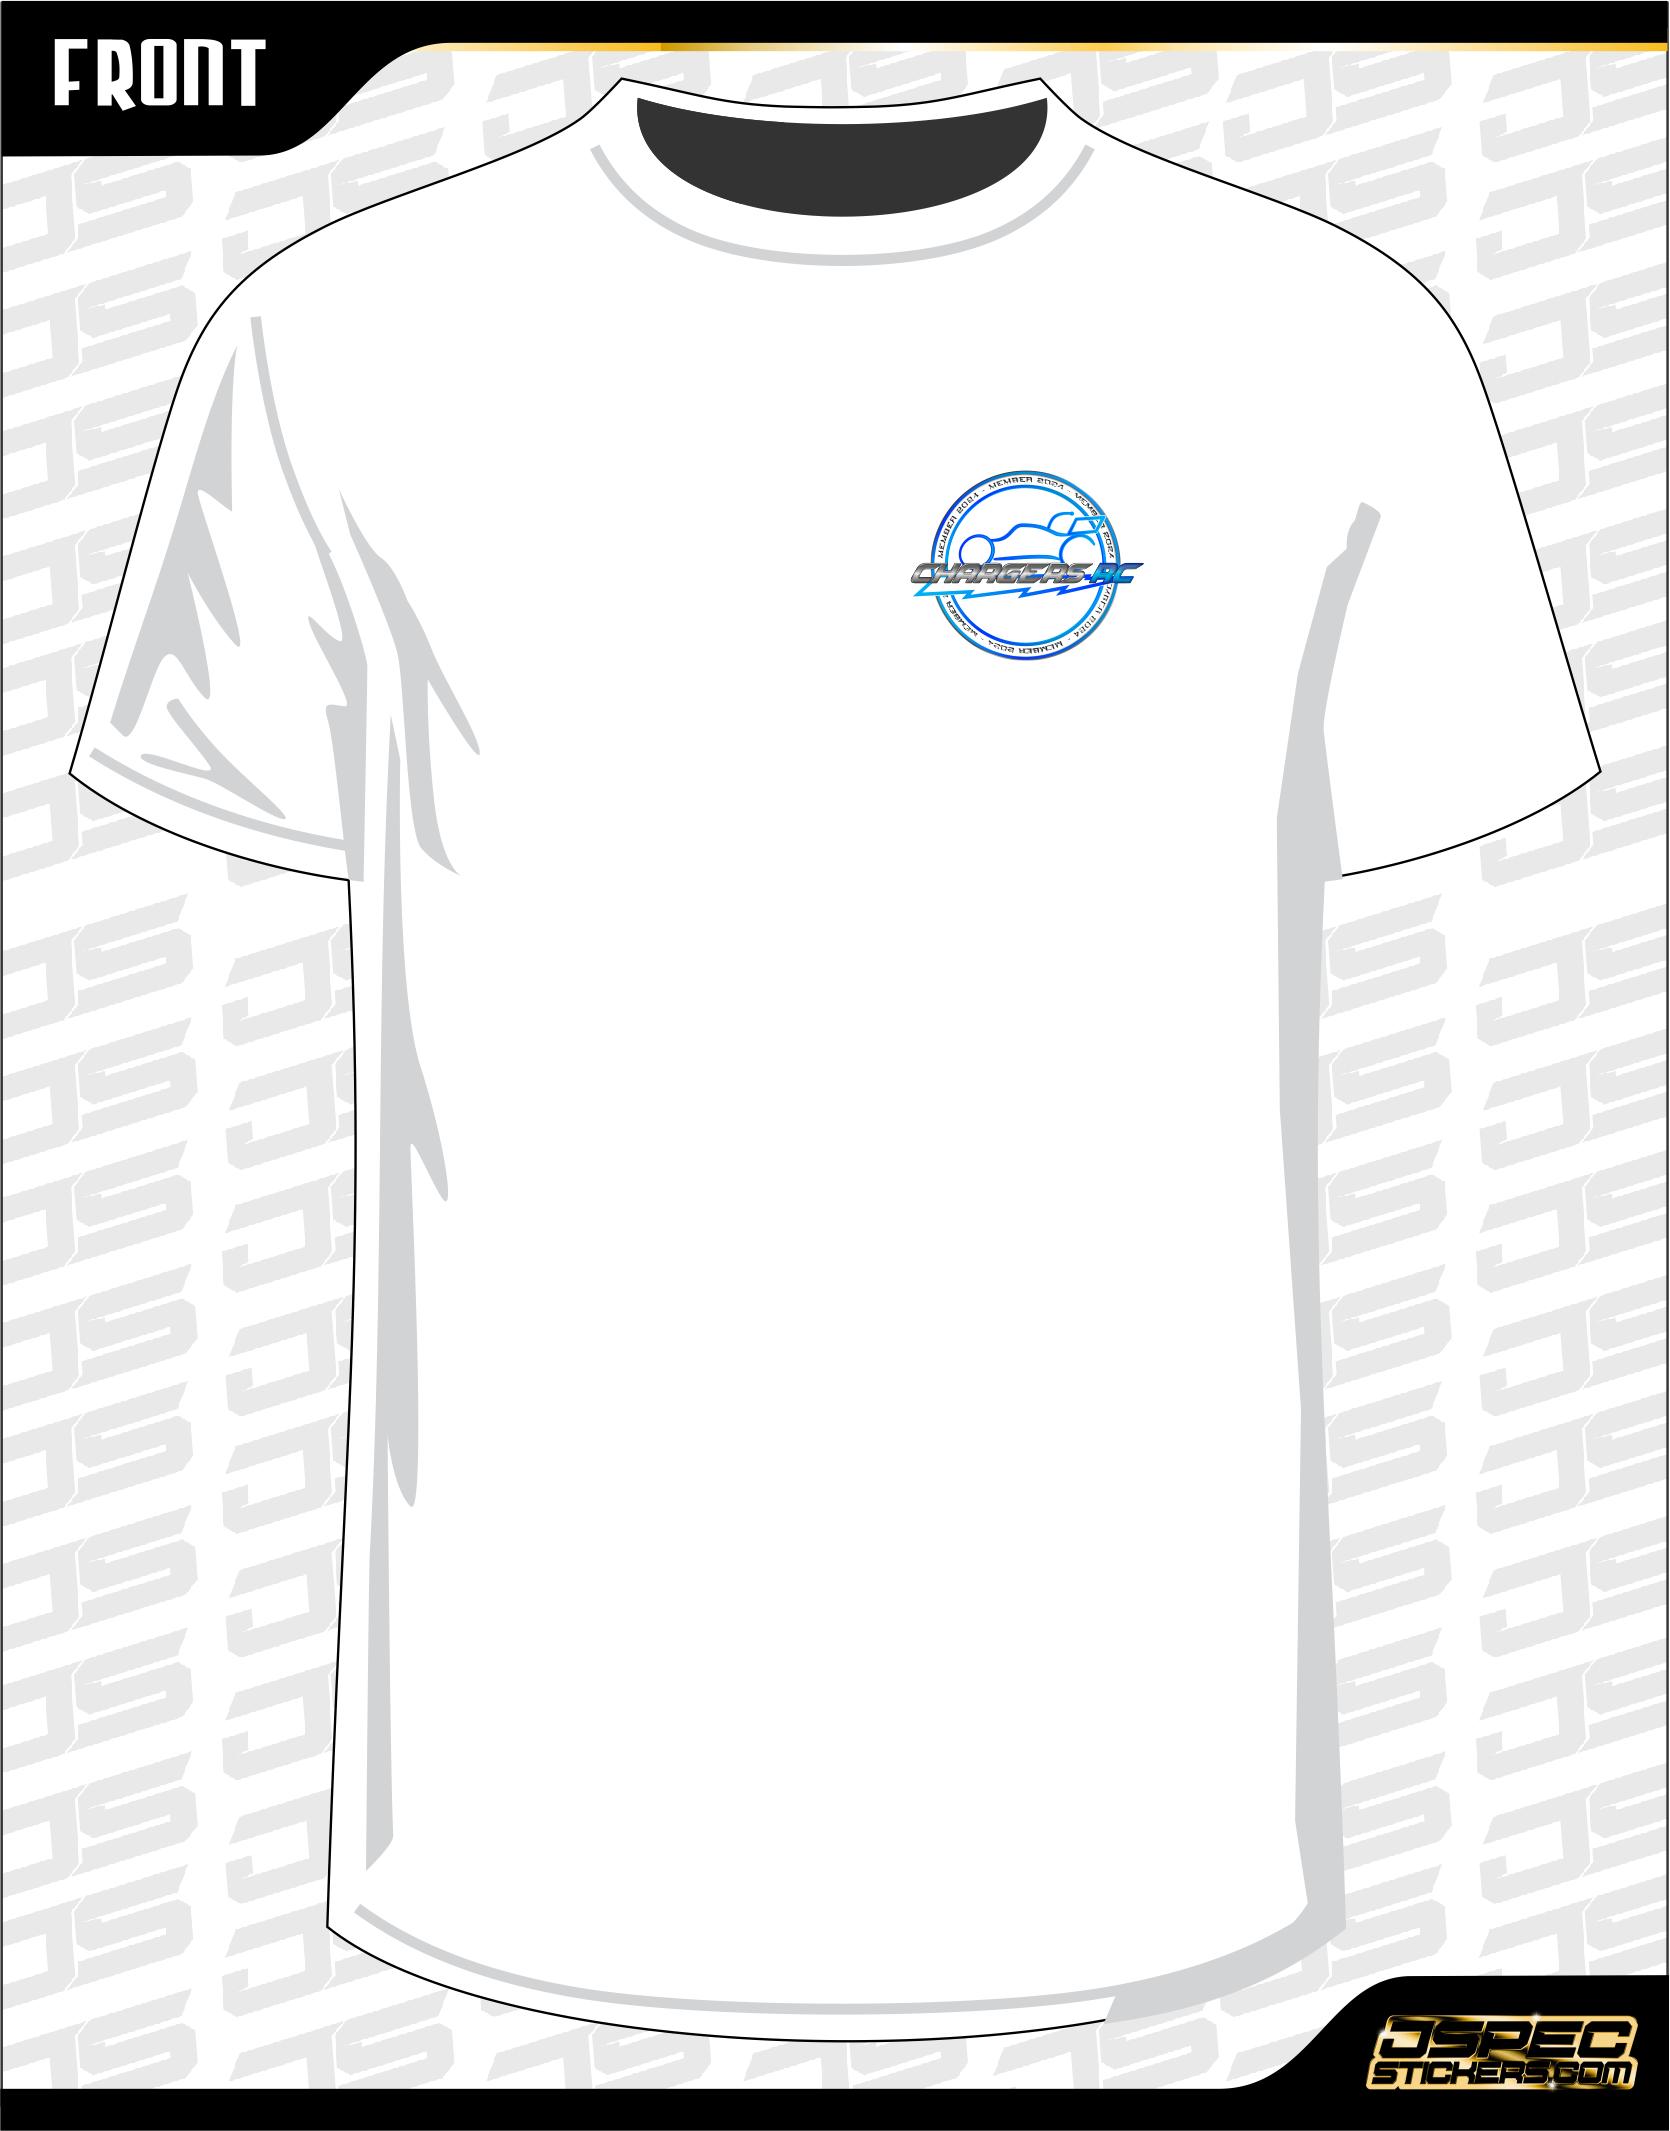 CHARGERS RC 2024 CLUB SHIRT (inc Race Number & Logos)